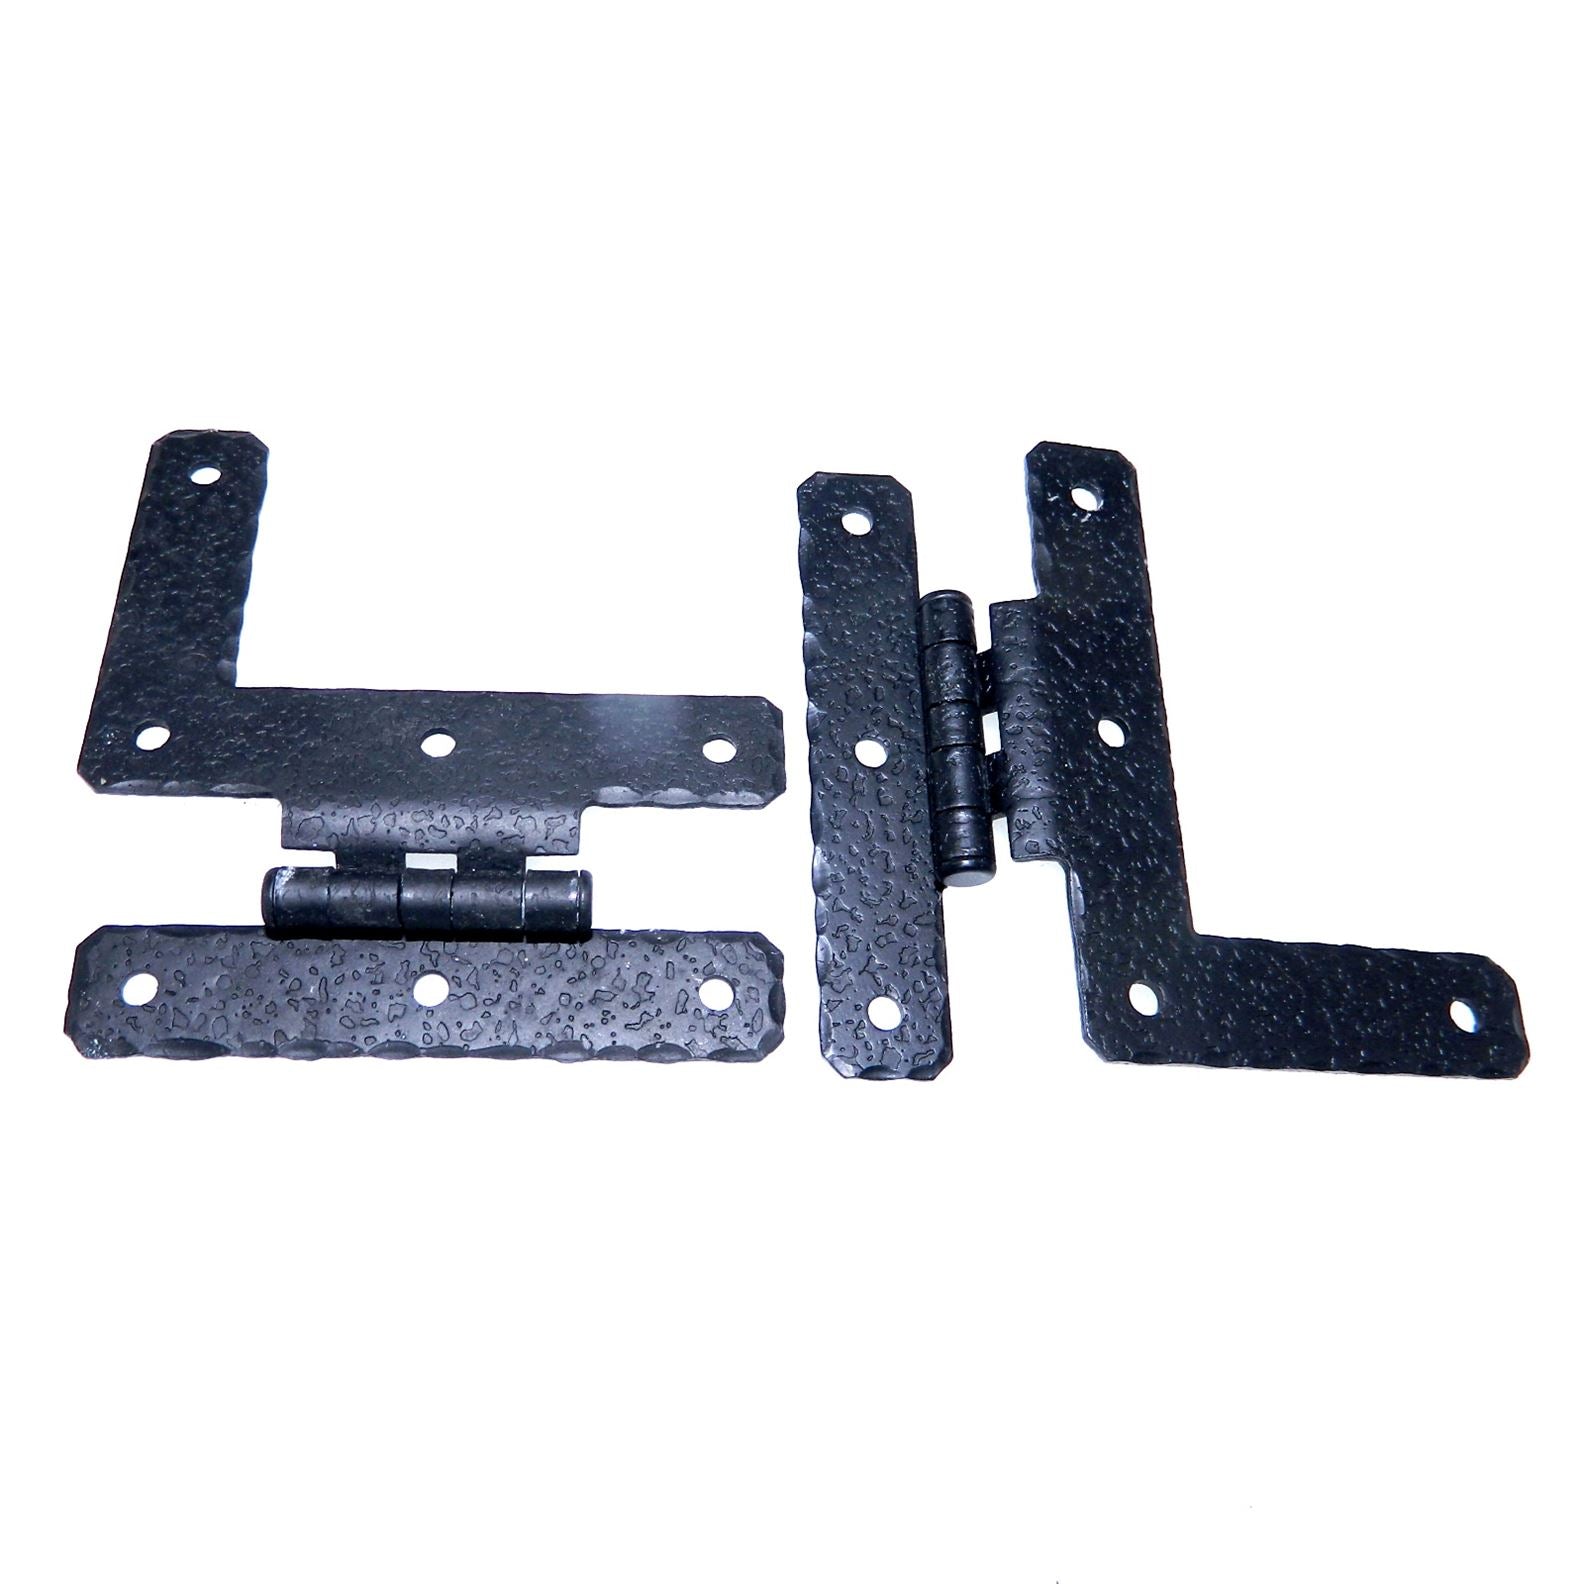 Pair Amerock Hammered Colonial Black 3/8" Offset "HL" Hinges A1656-CB